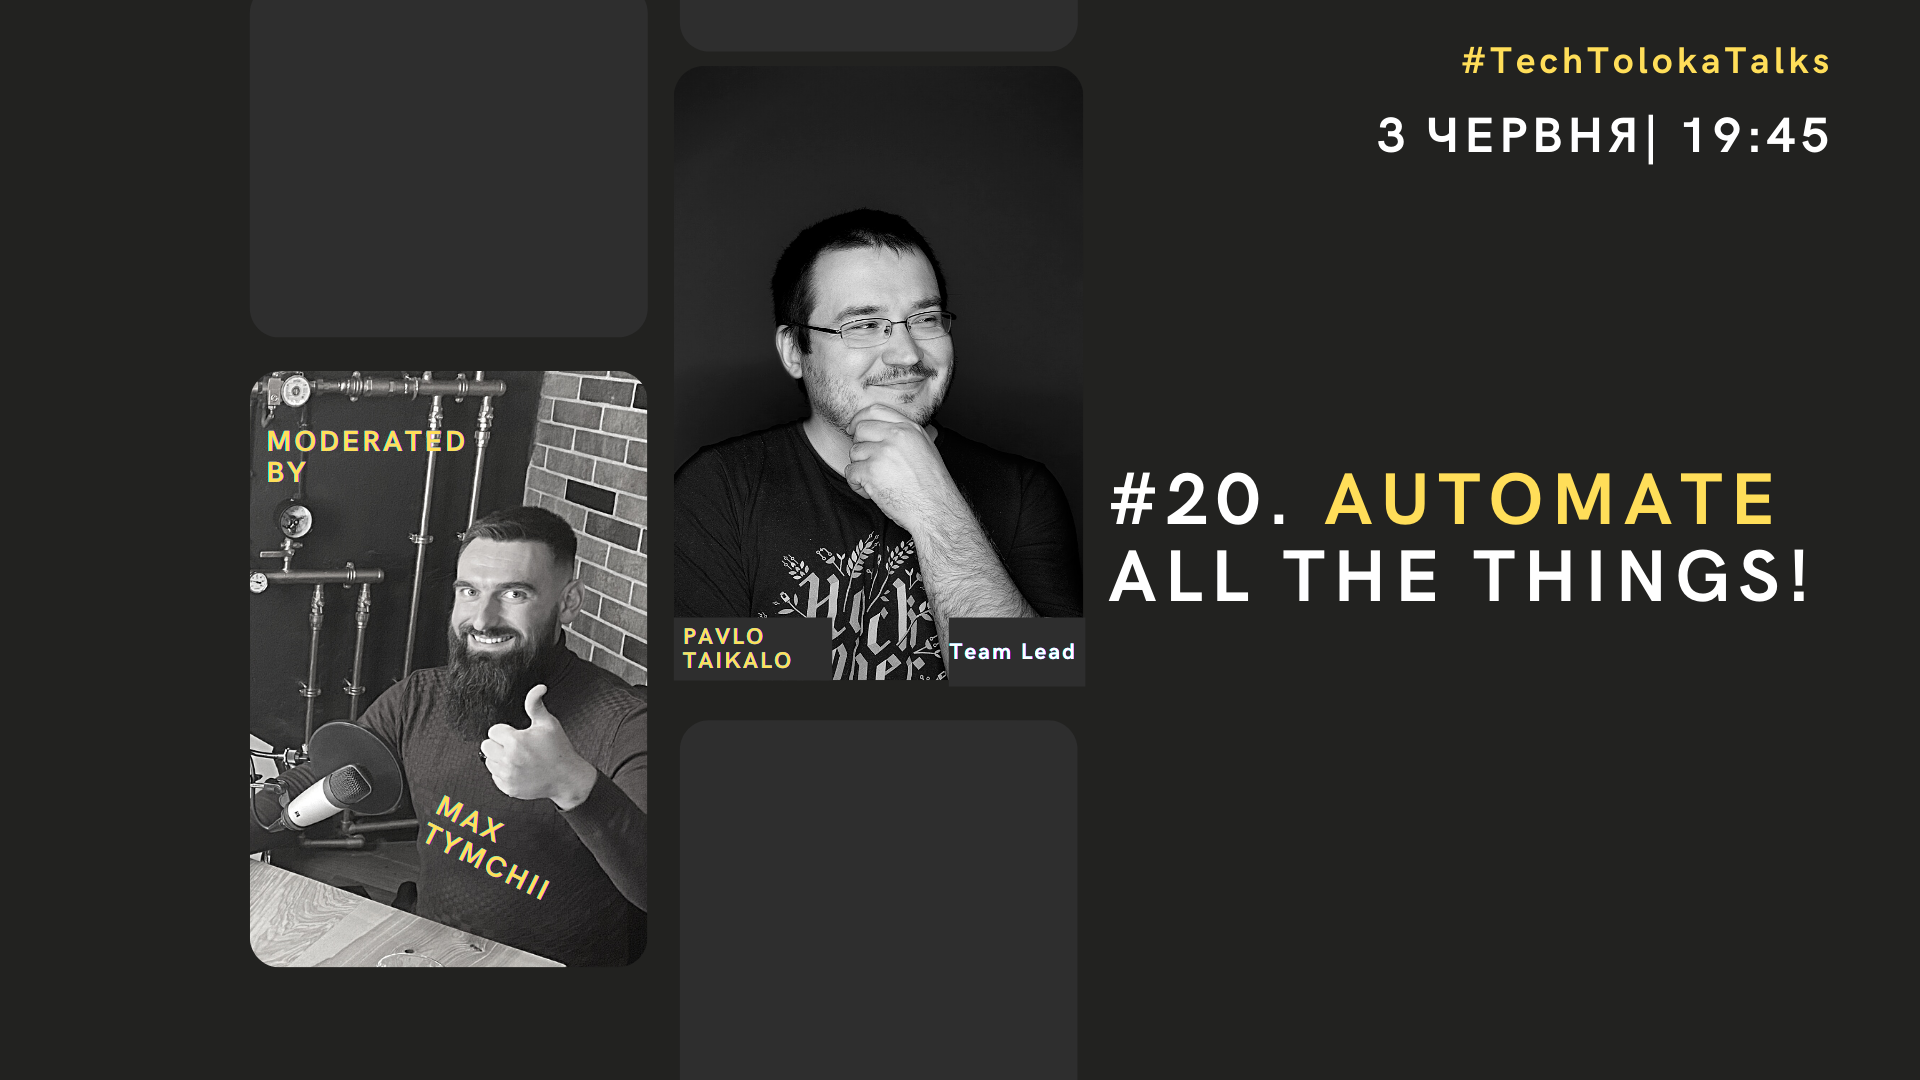 TechTolokaTalks #20. Automate all the things!